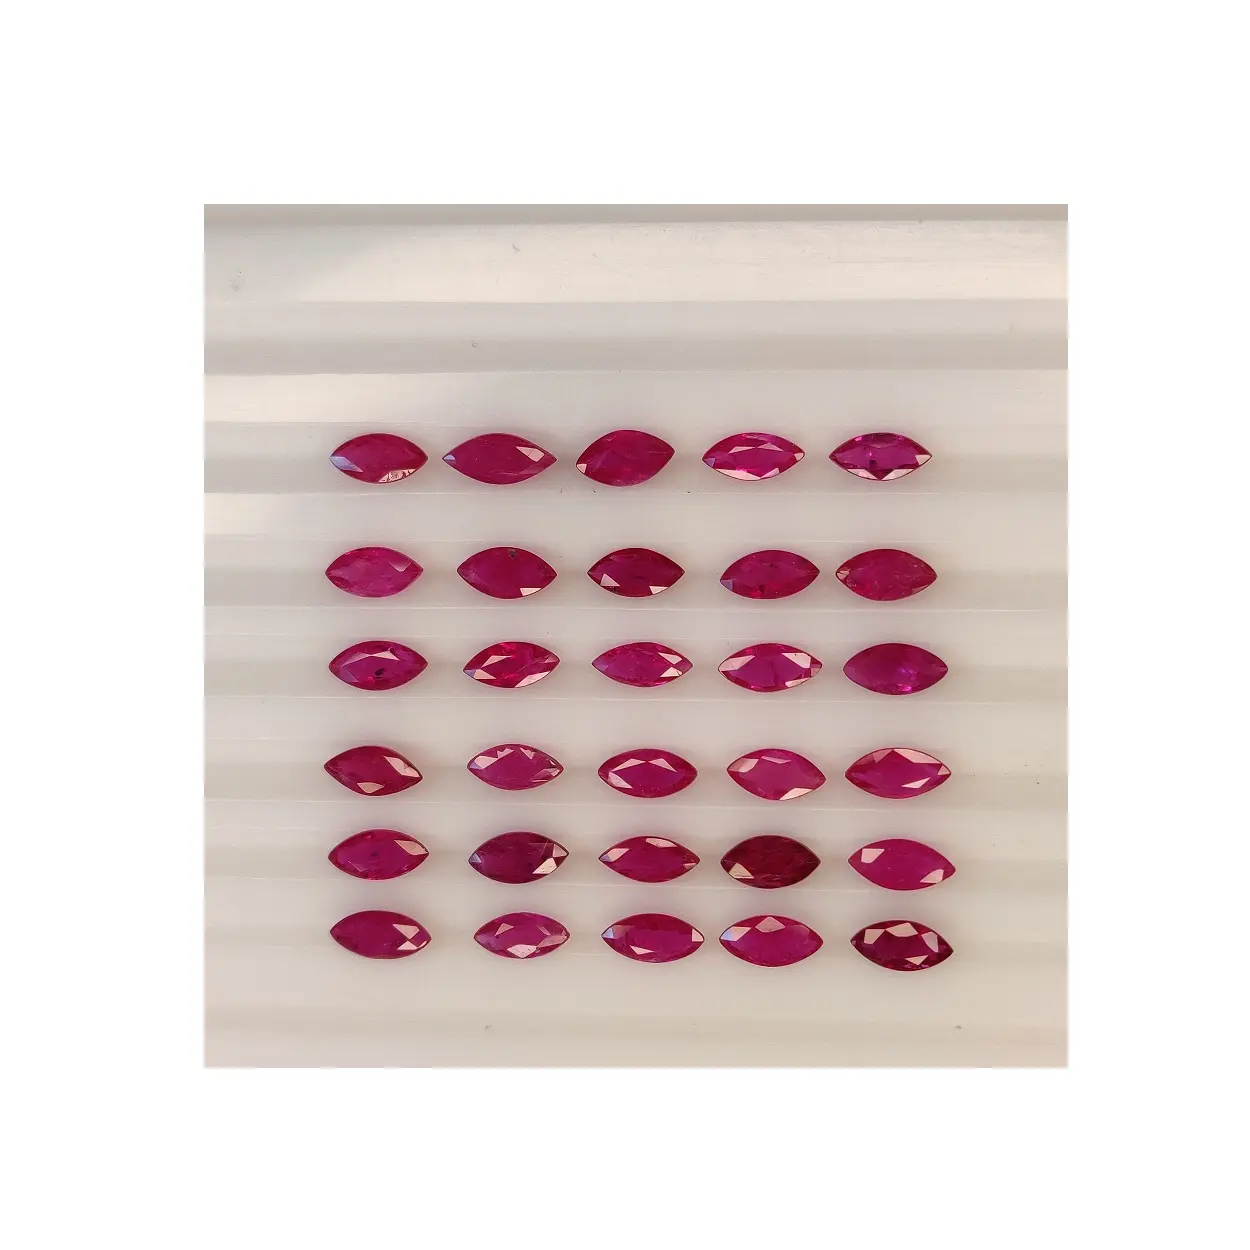 Marquise Cut Natural Mozambique Ruby Gemstone for Jewelry Making with Custom Packaging Available for Sale